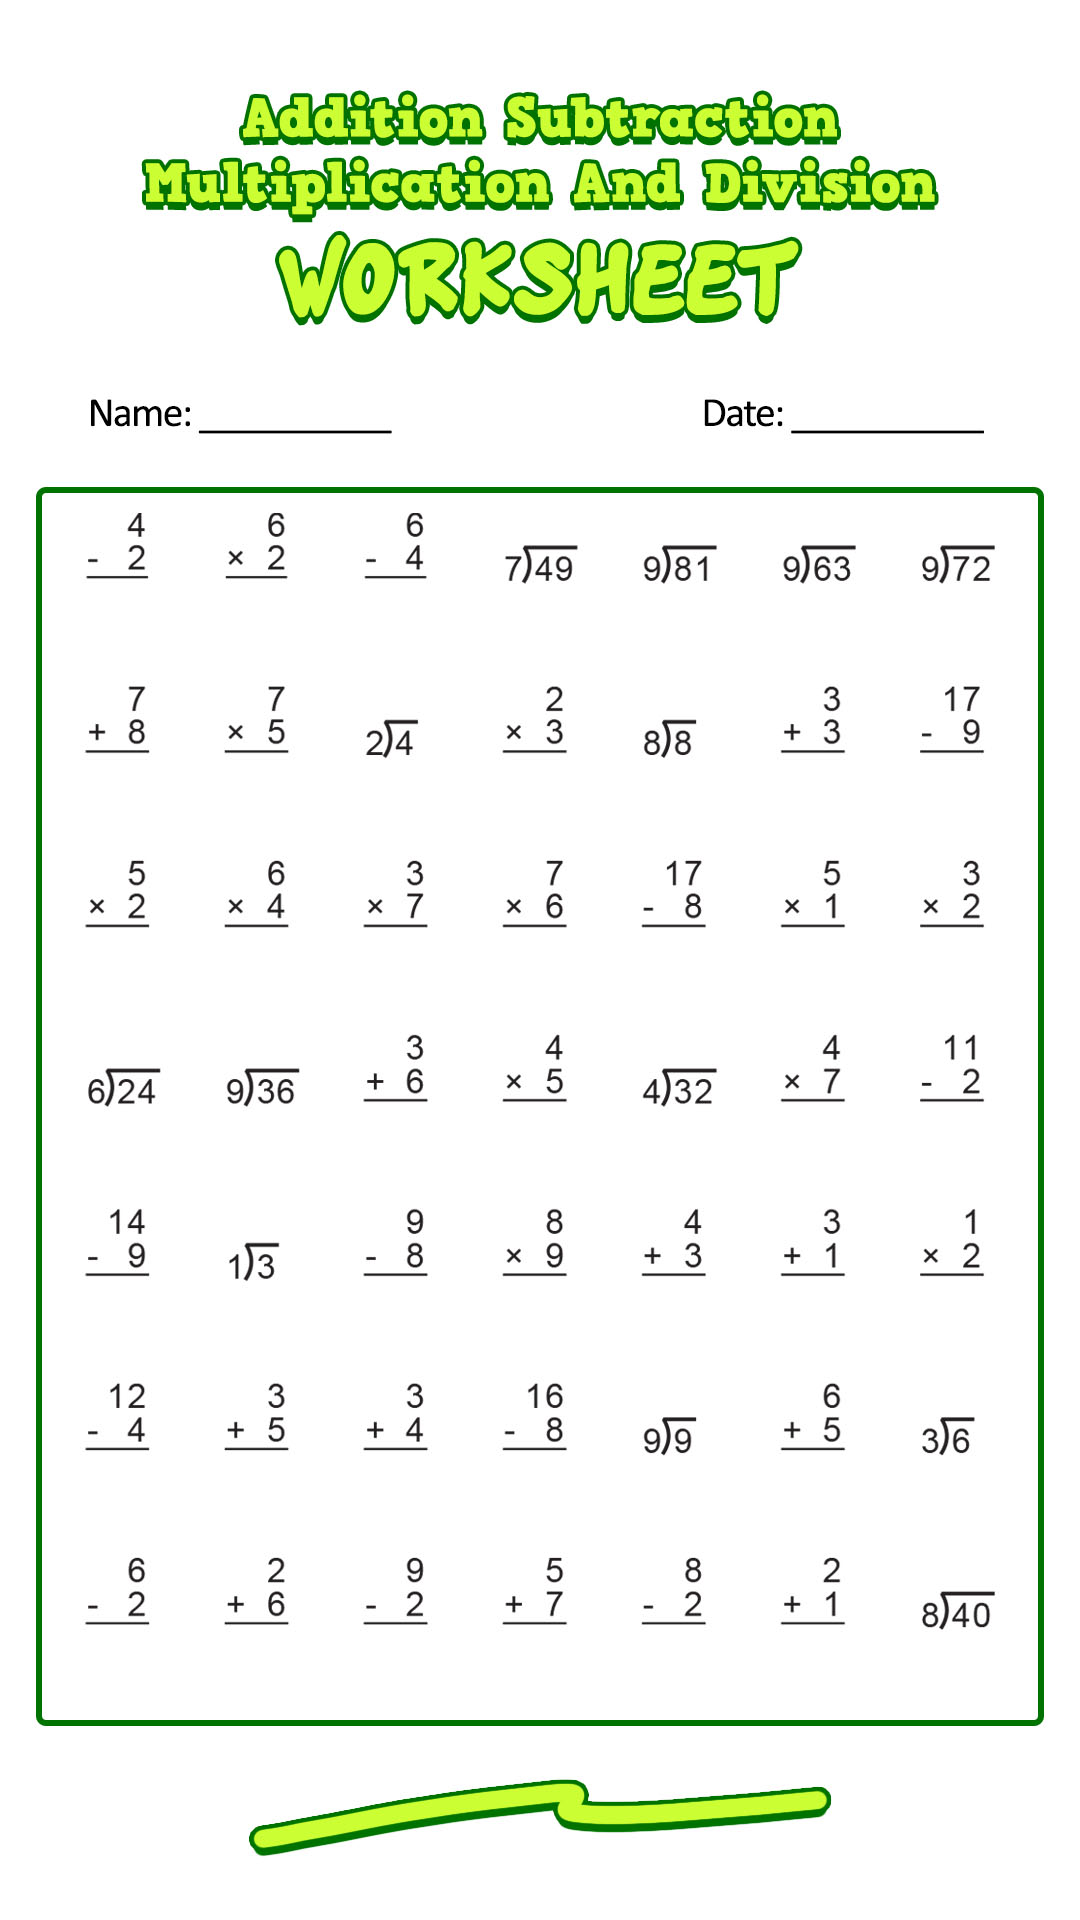 subtraction-addition-multiplication-division-interactive-worksheet